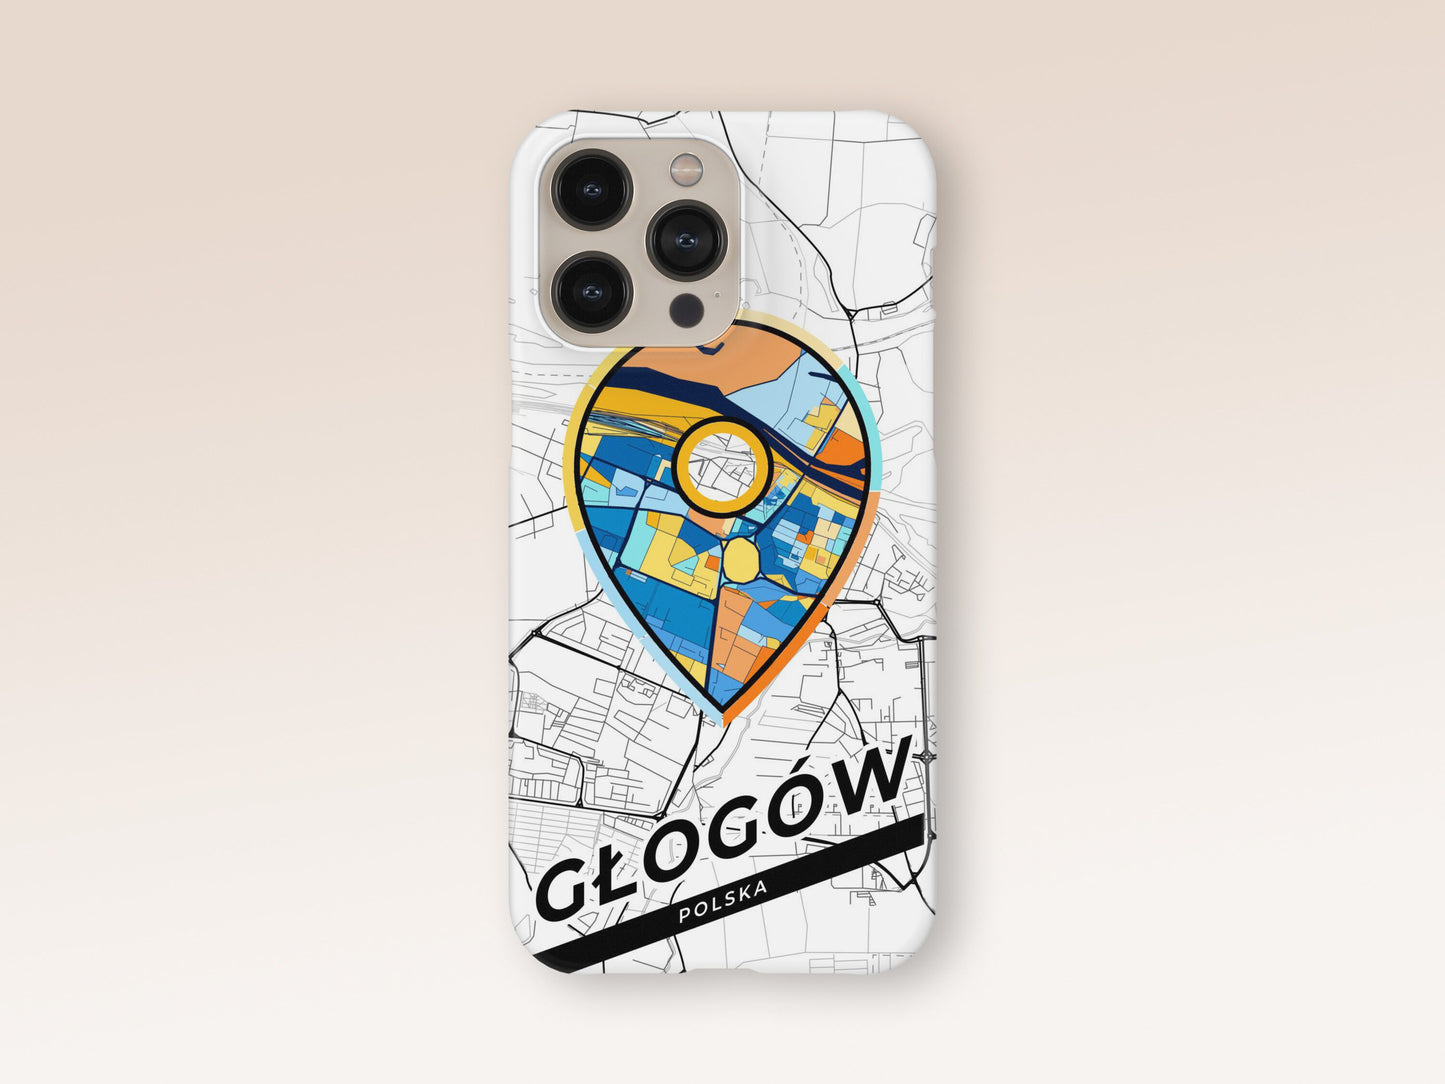 Głogów Poland slim phone case with colorful icon. Birthday, wedding or housewarming gift. Couple match cases. 1